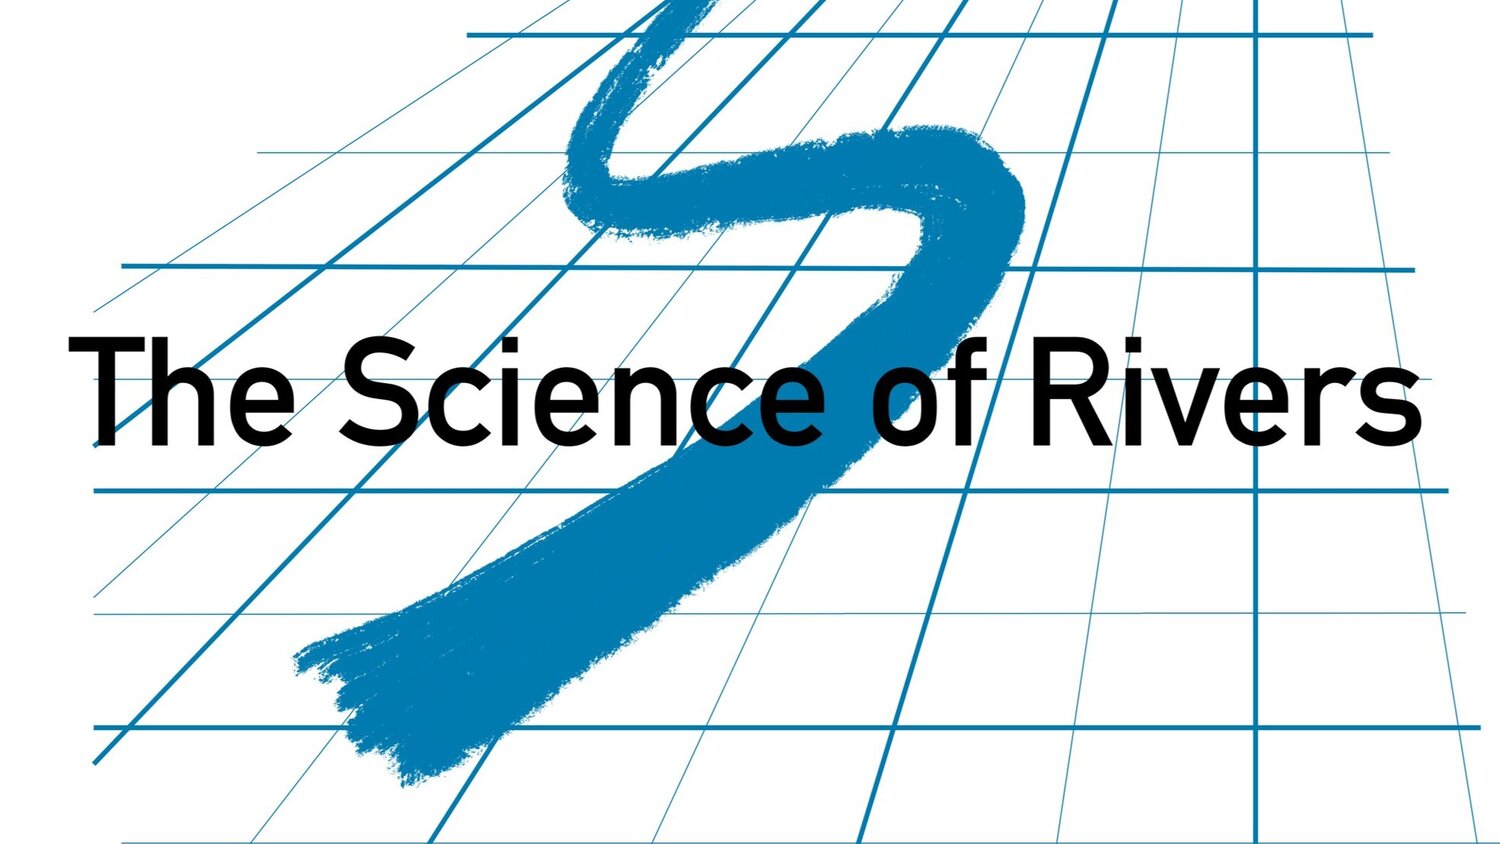 The Science of Rivers